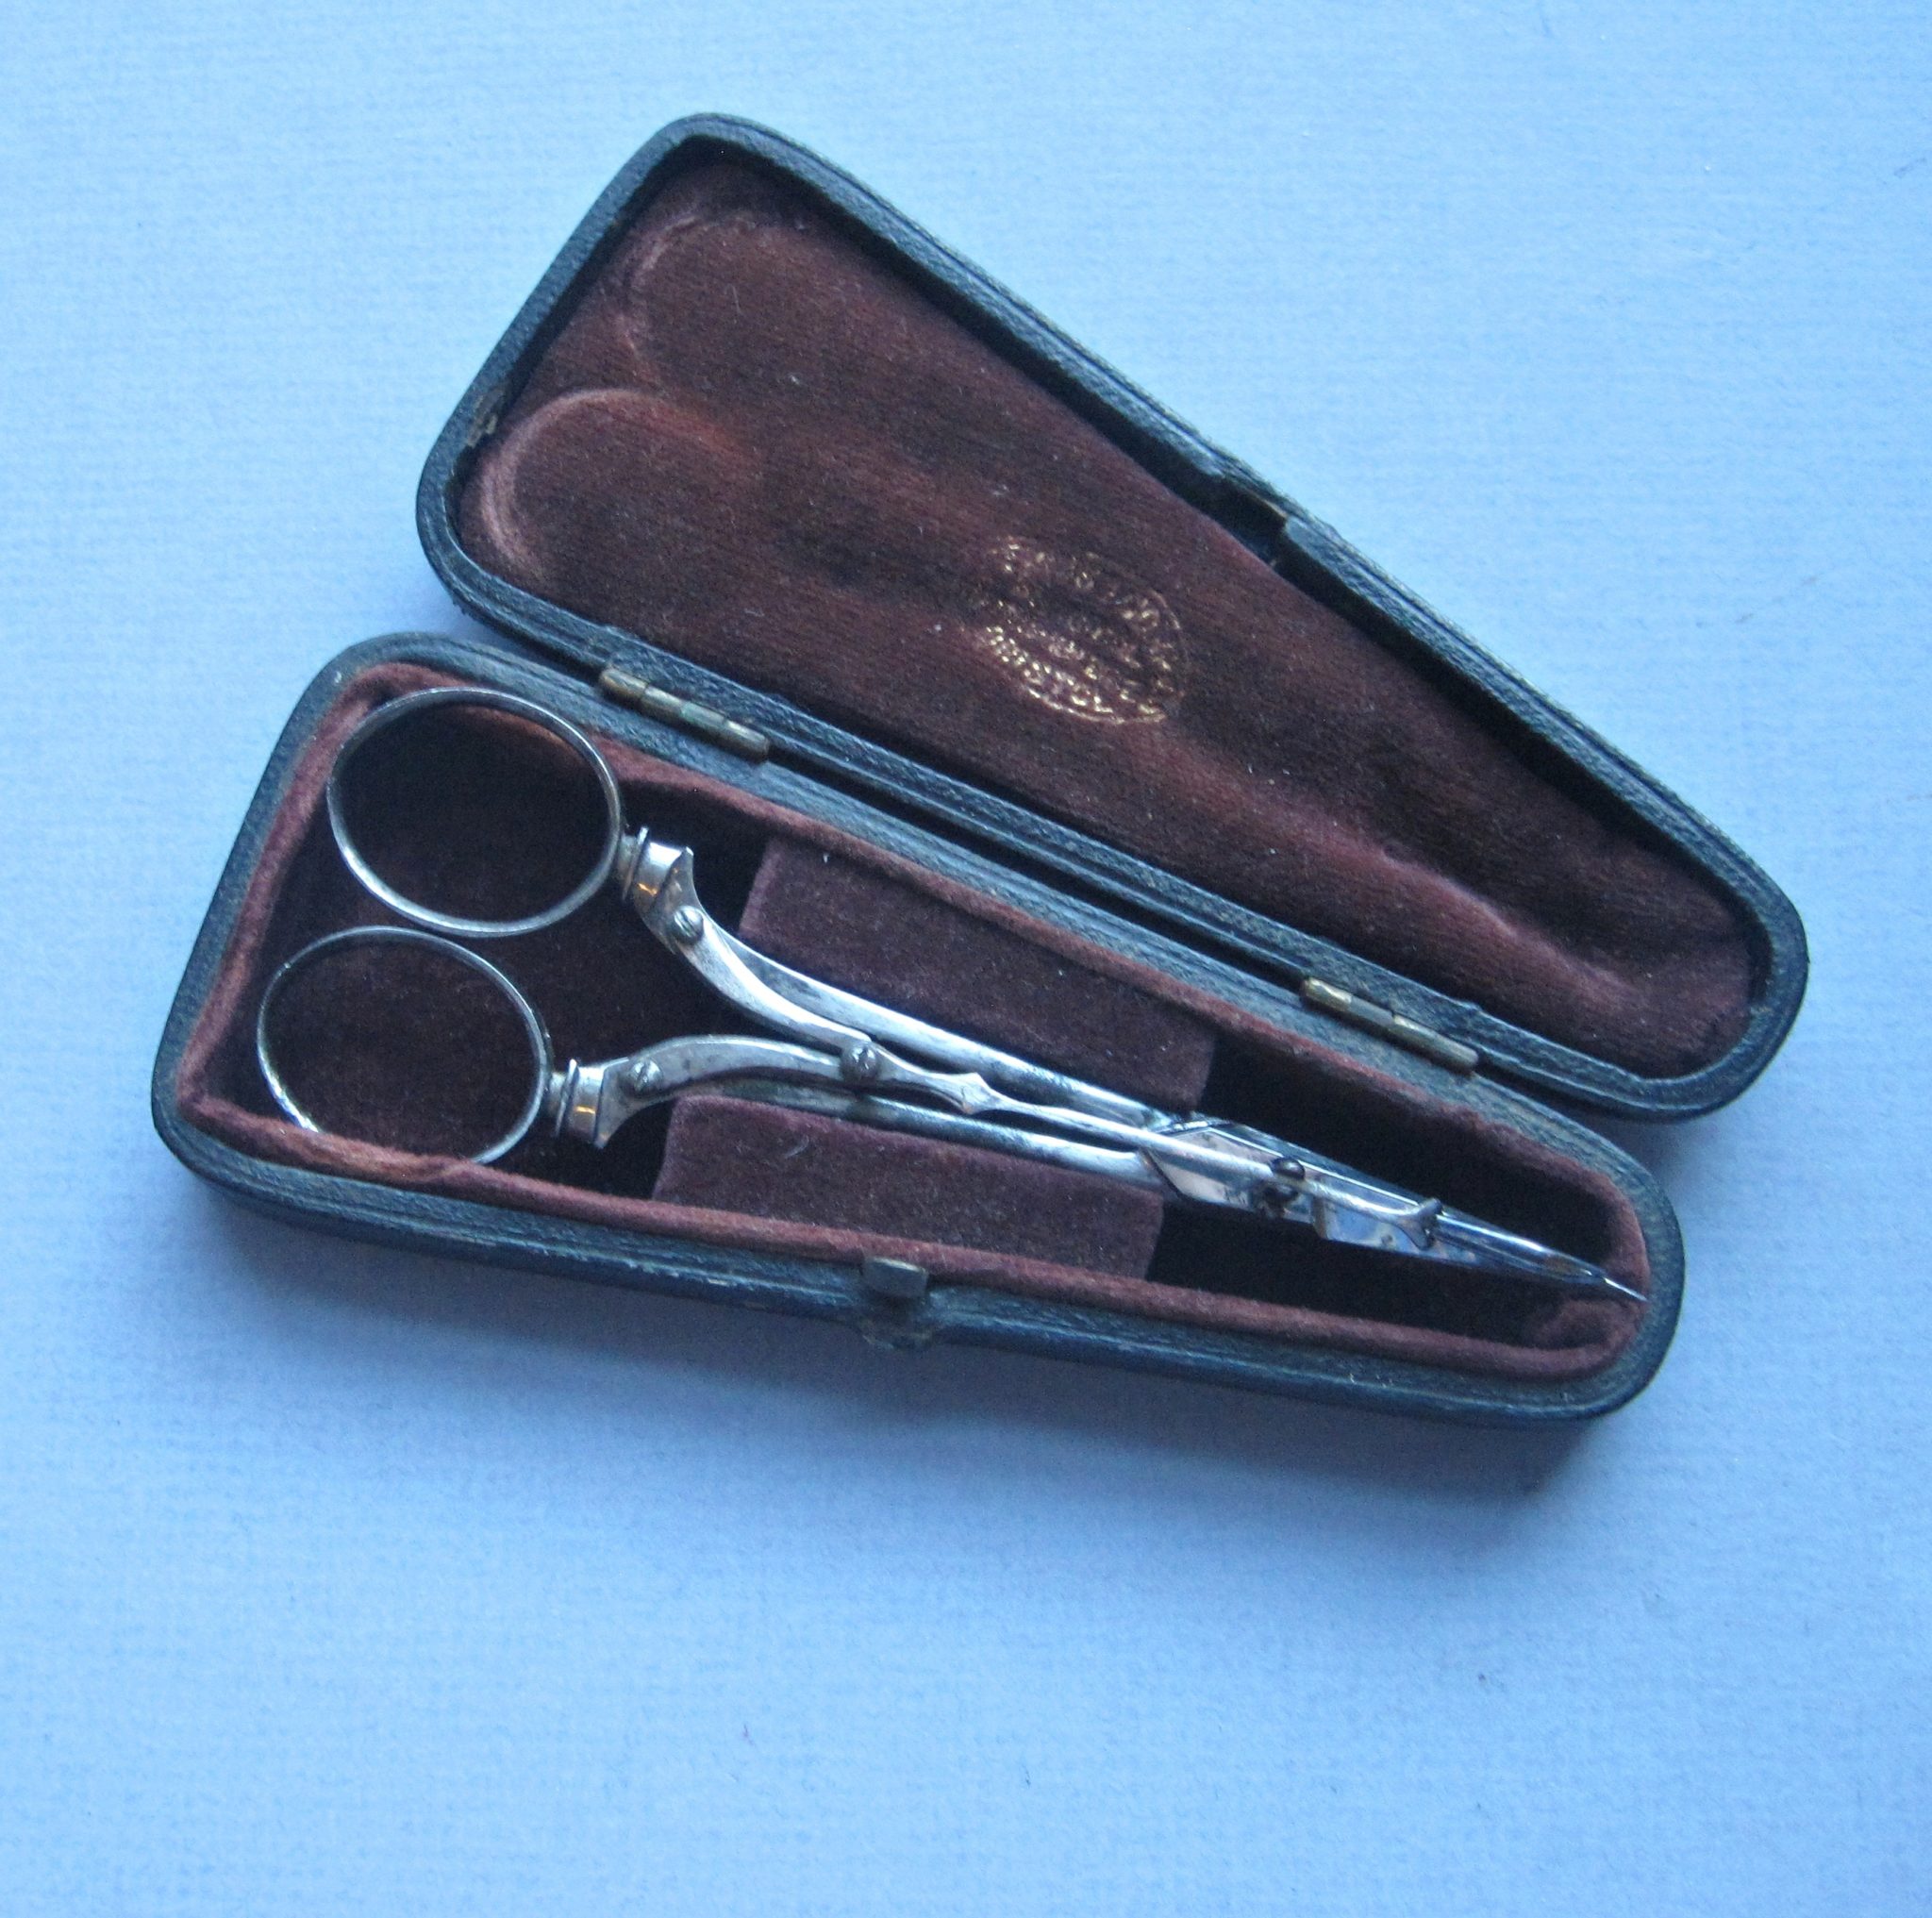 A Skin-Grafting and Iredectomy Scissors by Ferris